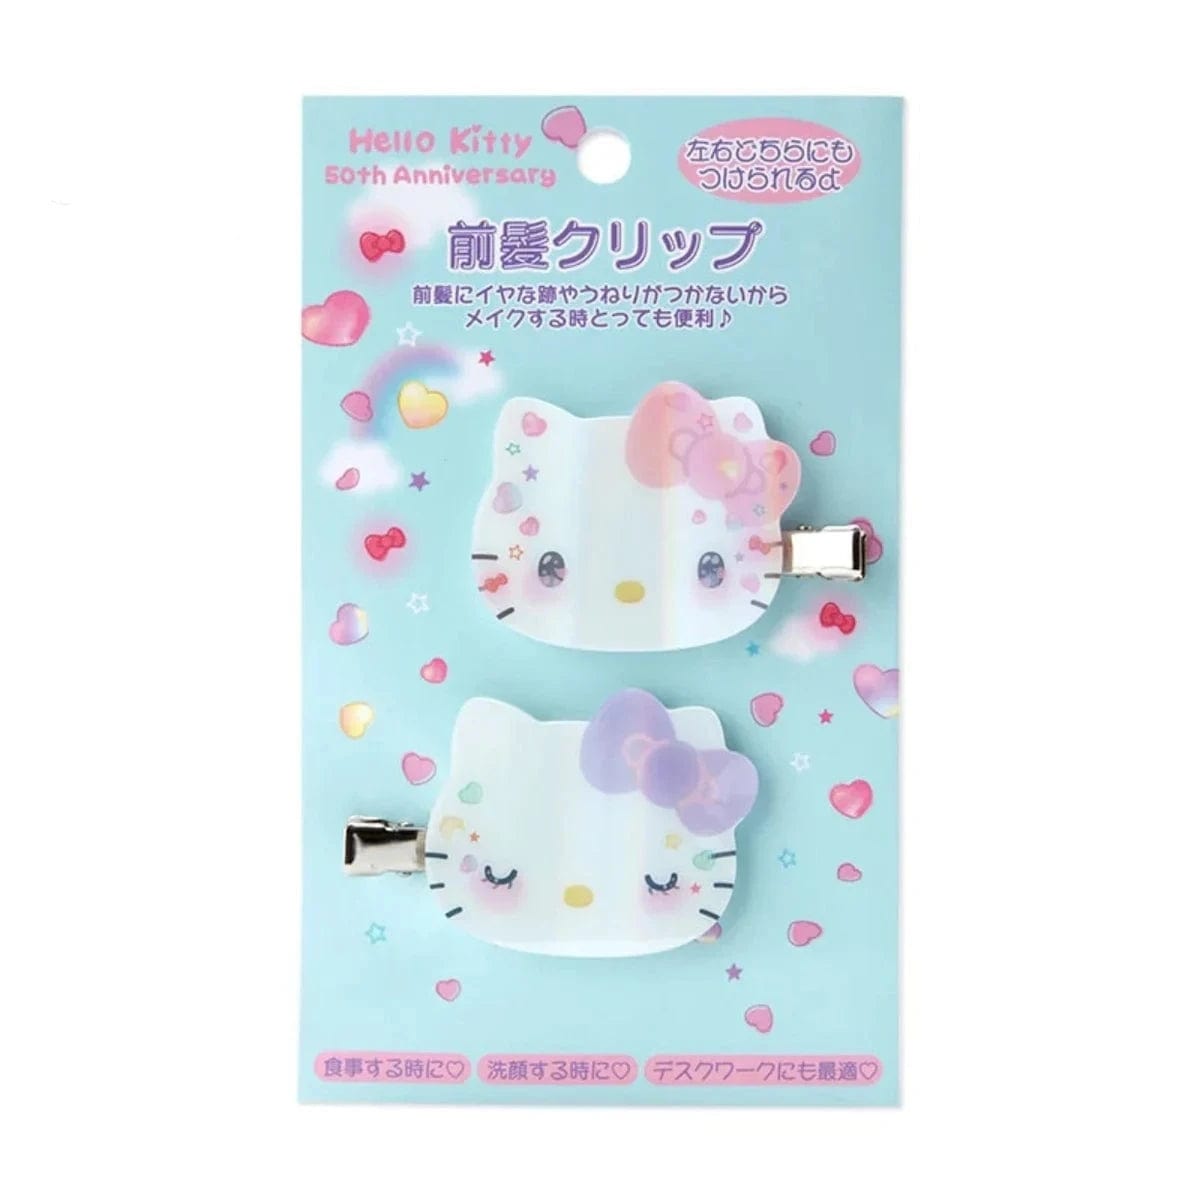 Hello Kitty 50th Anniversary "The Future In Our Eyes" Hair Clip Set